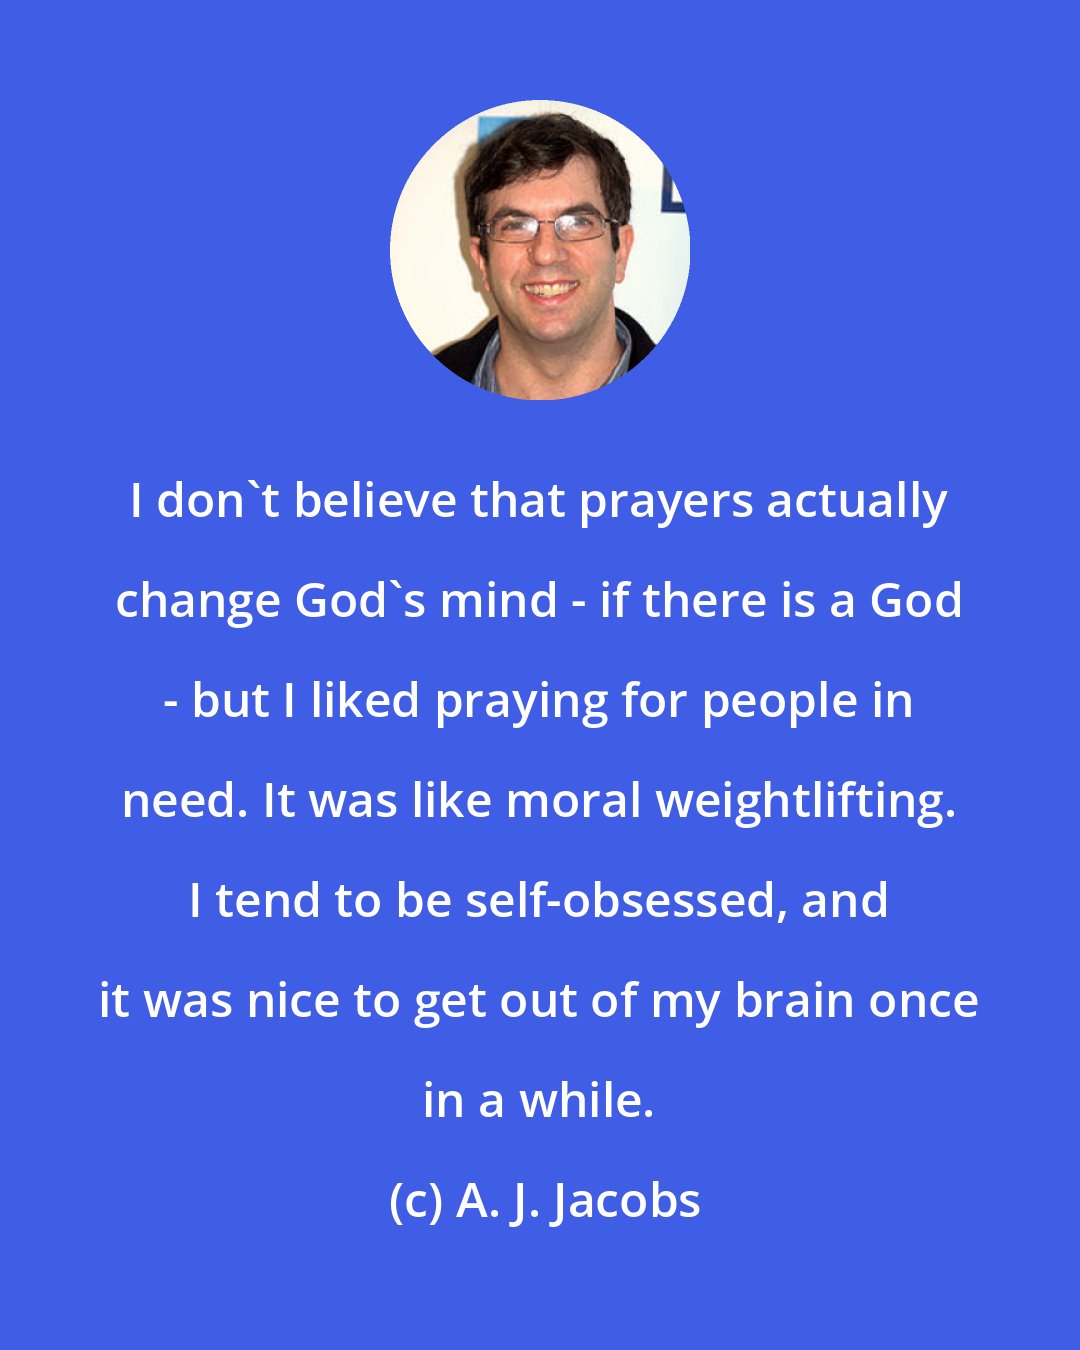 A. J. Jacobs: I don't believe that prayers actually change God's mind - if there is a God - but I liked praying for people in need. It was like moral weightlifting. I tend to be self-obsessed, and it was nice to get out of my brain once in a while.